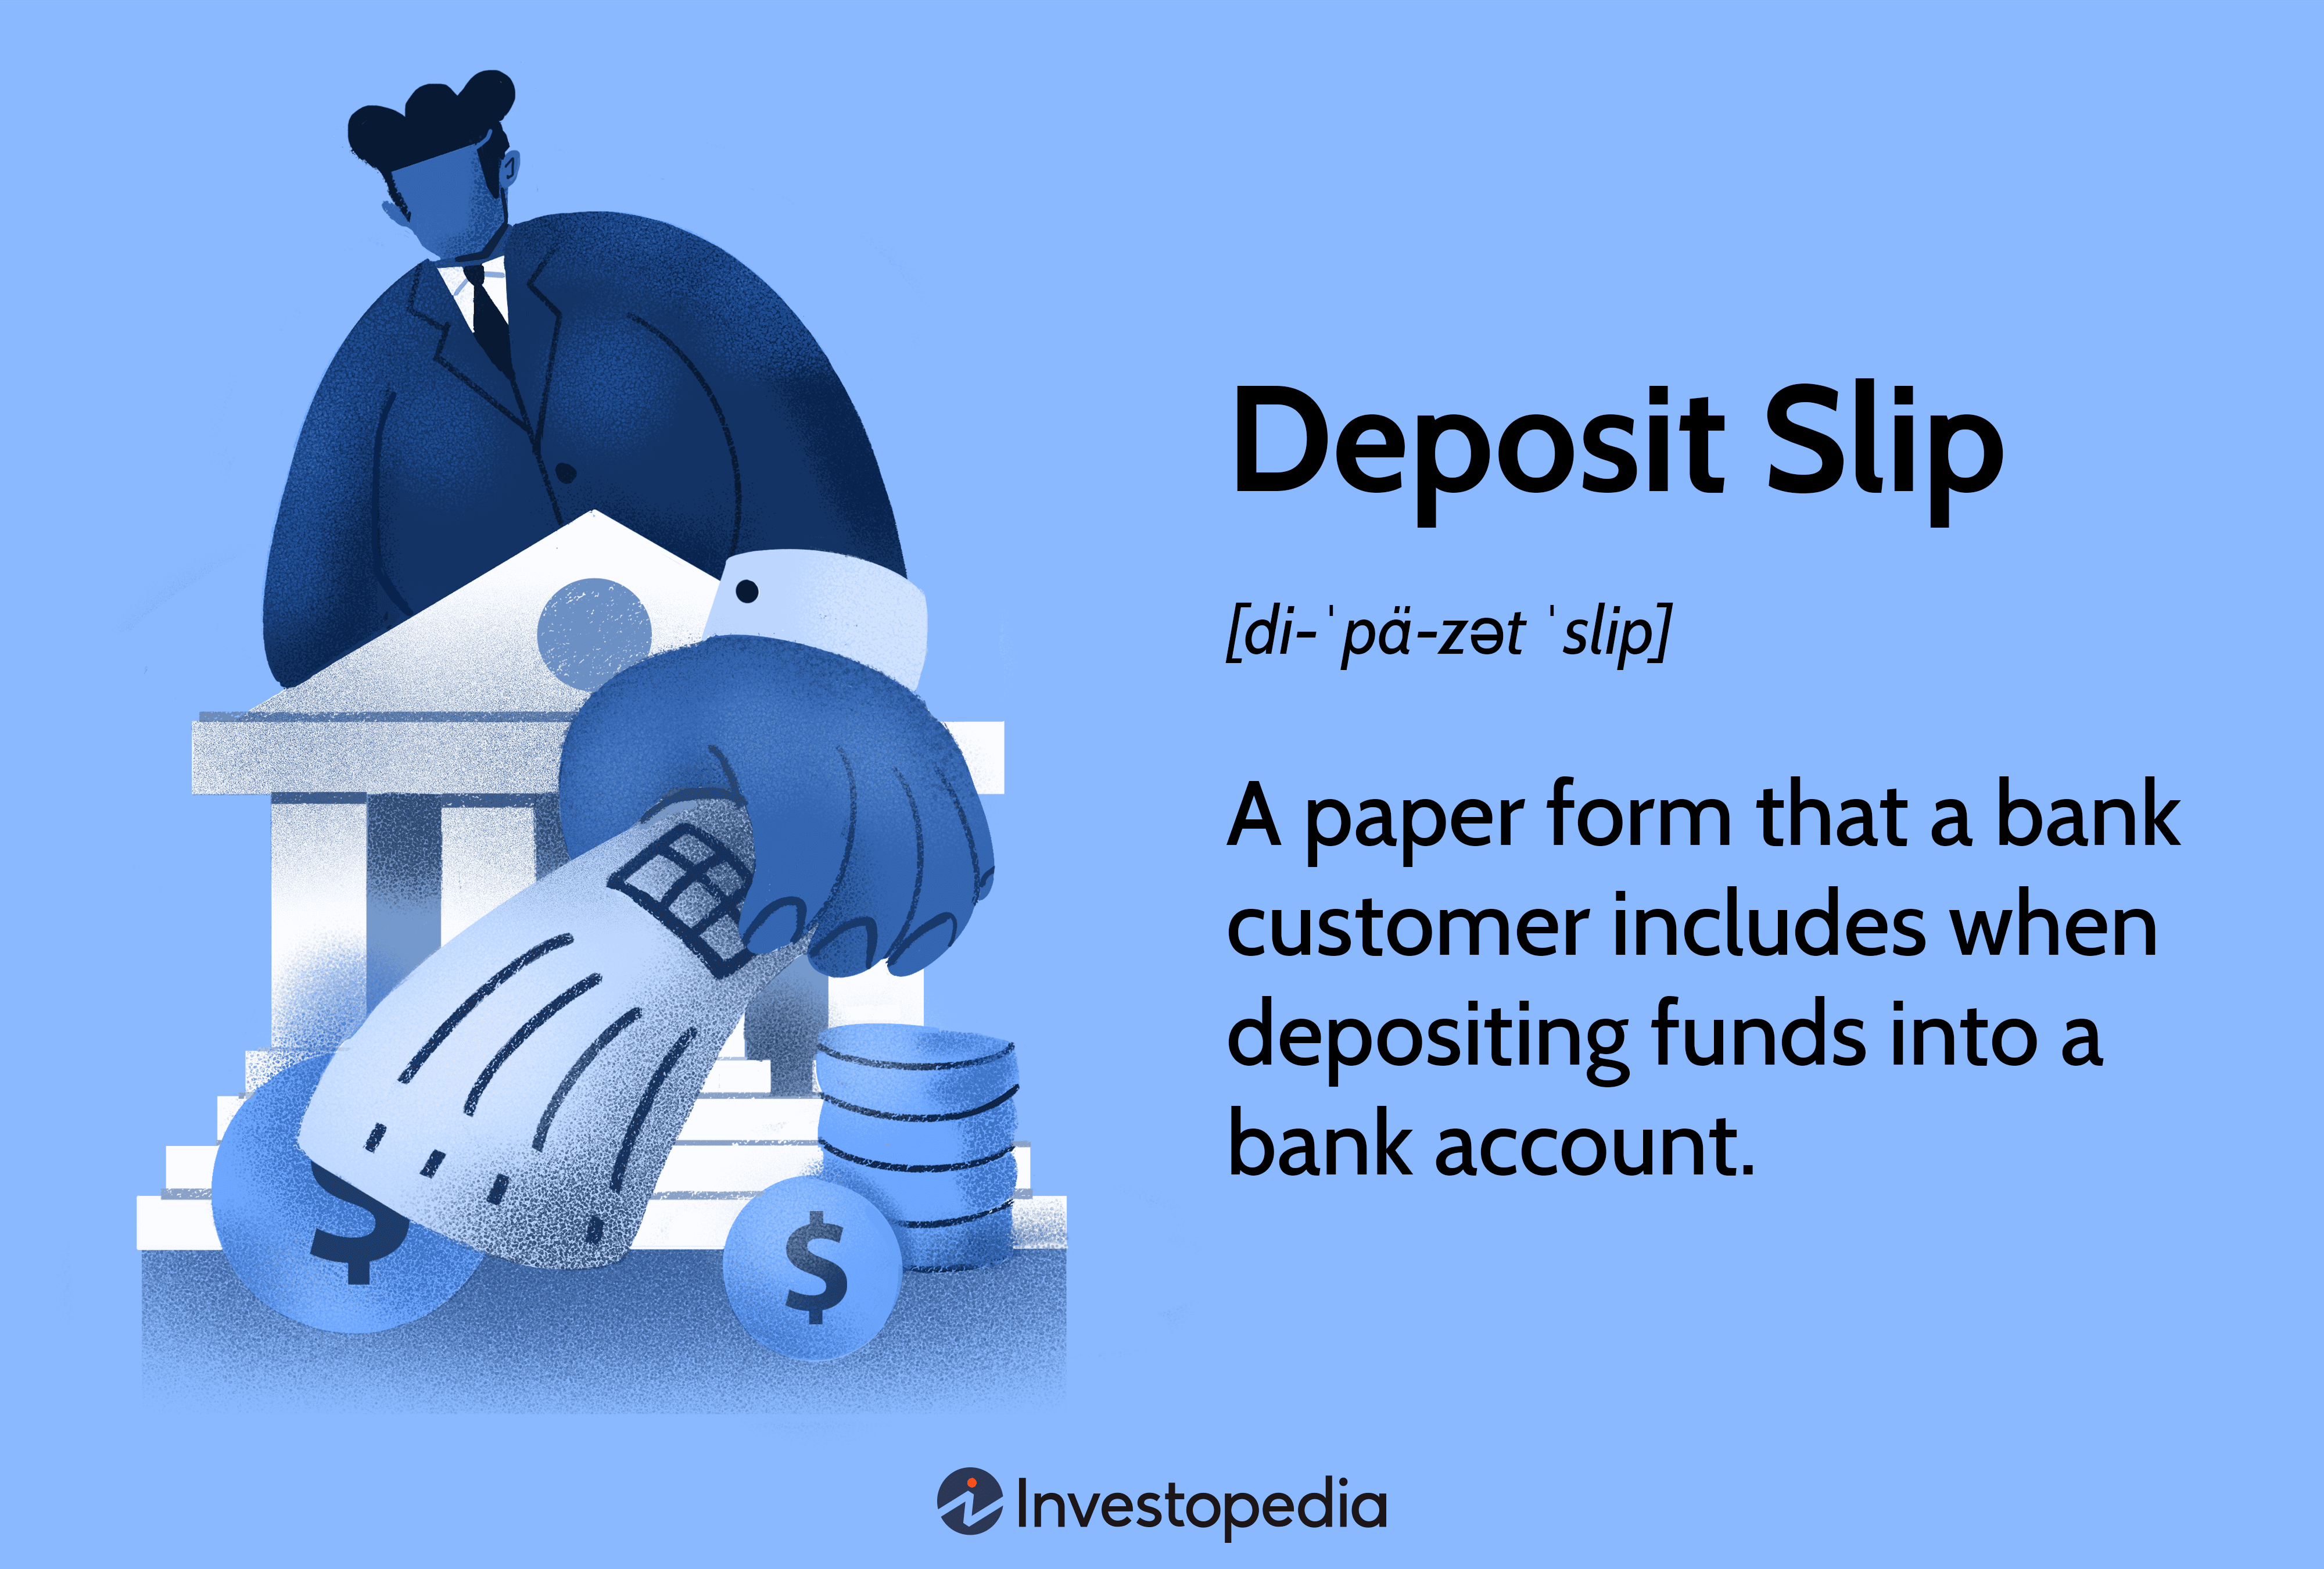 Deposit Slip: A paper form that a bank customer includes when depositing funds into a bank account.